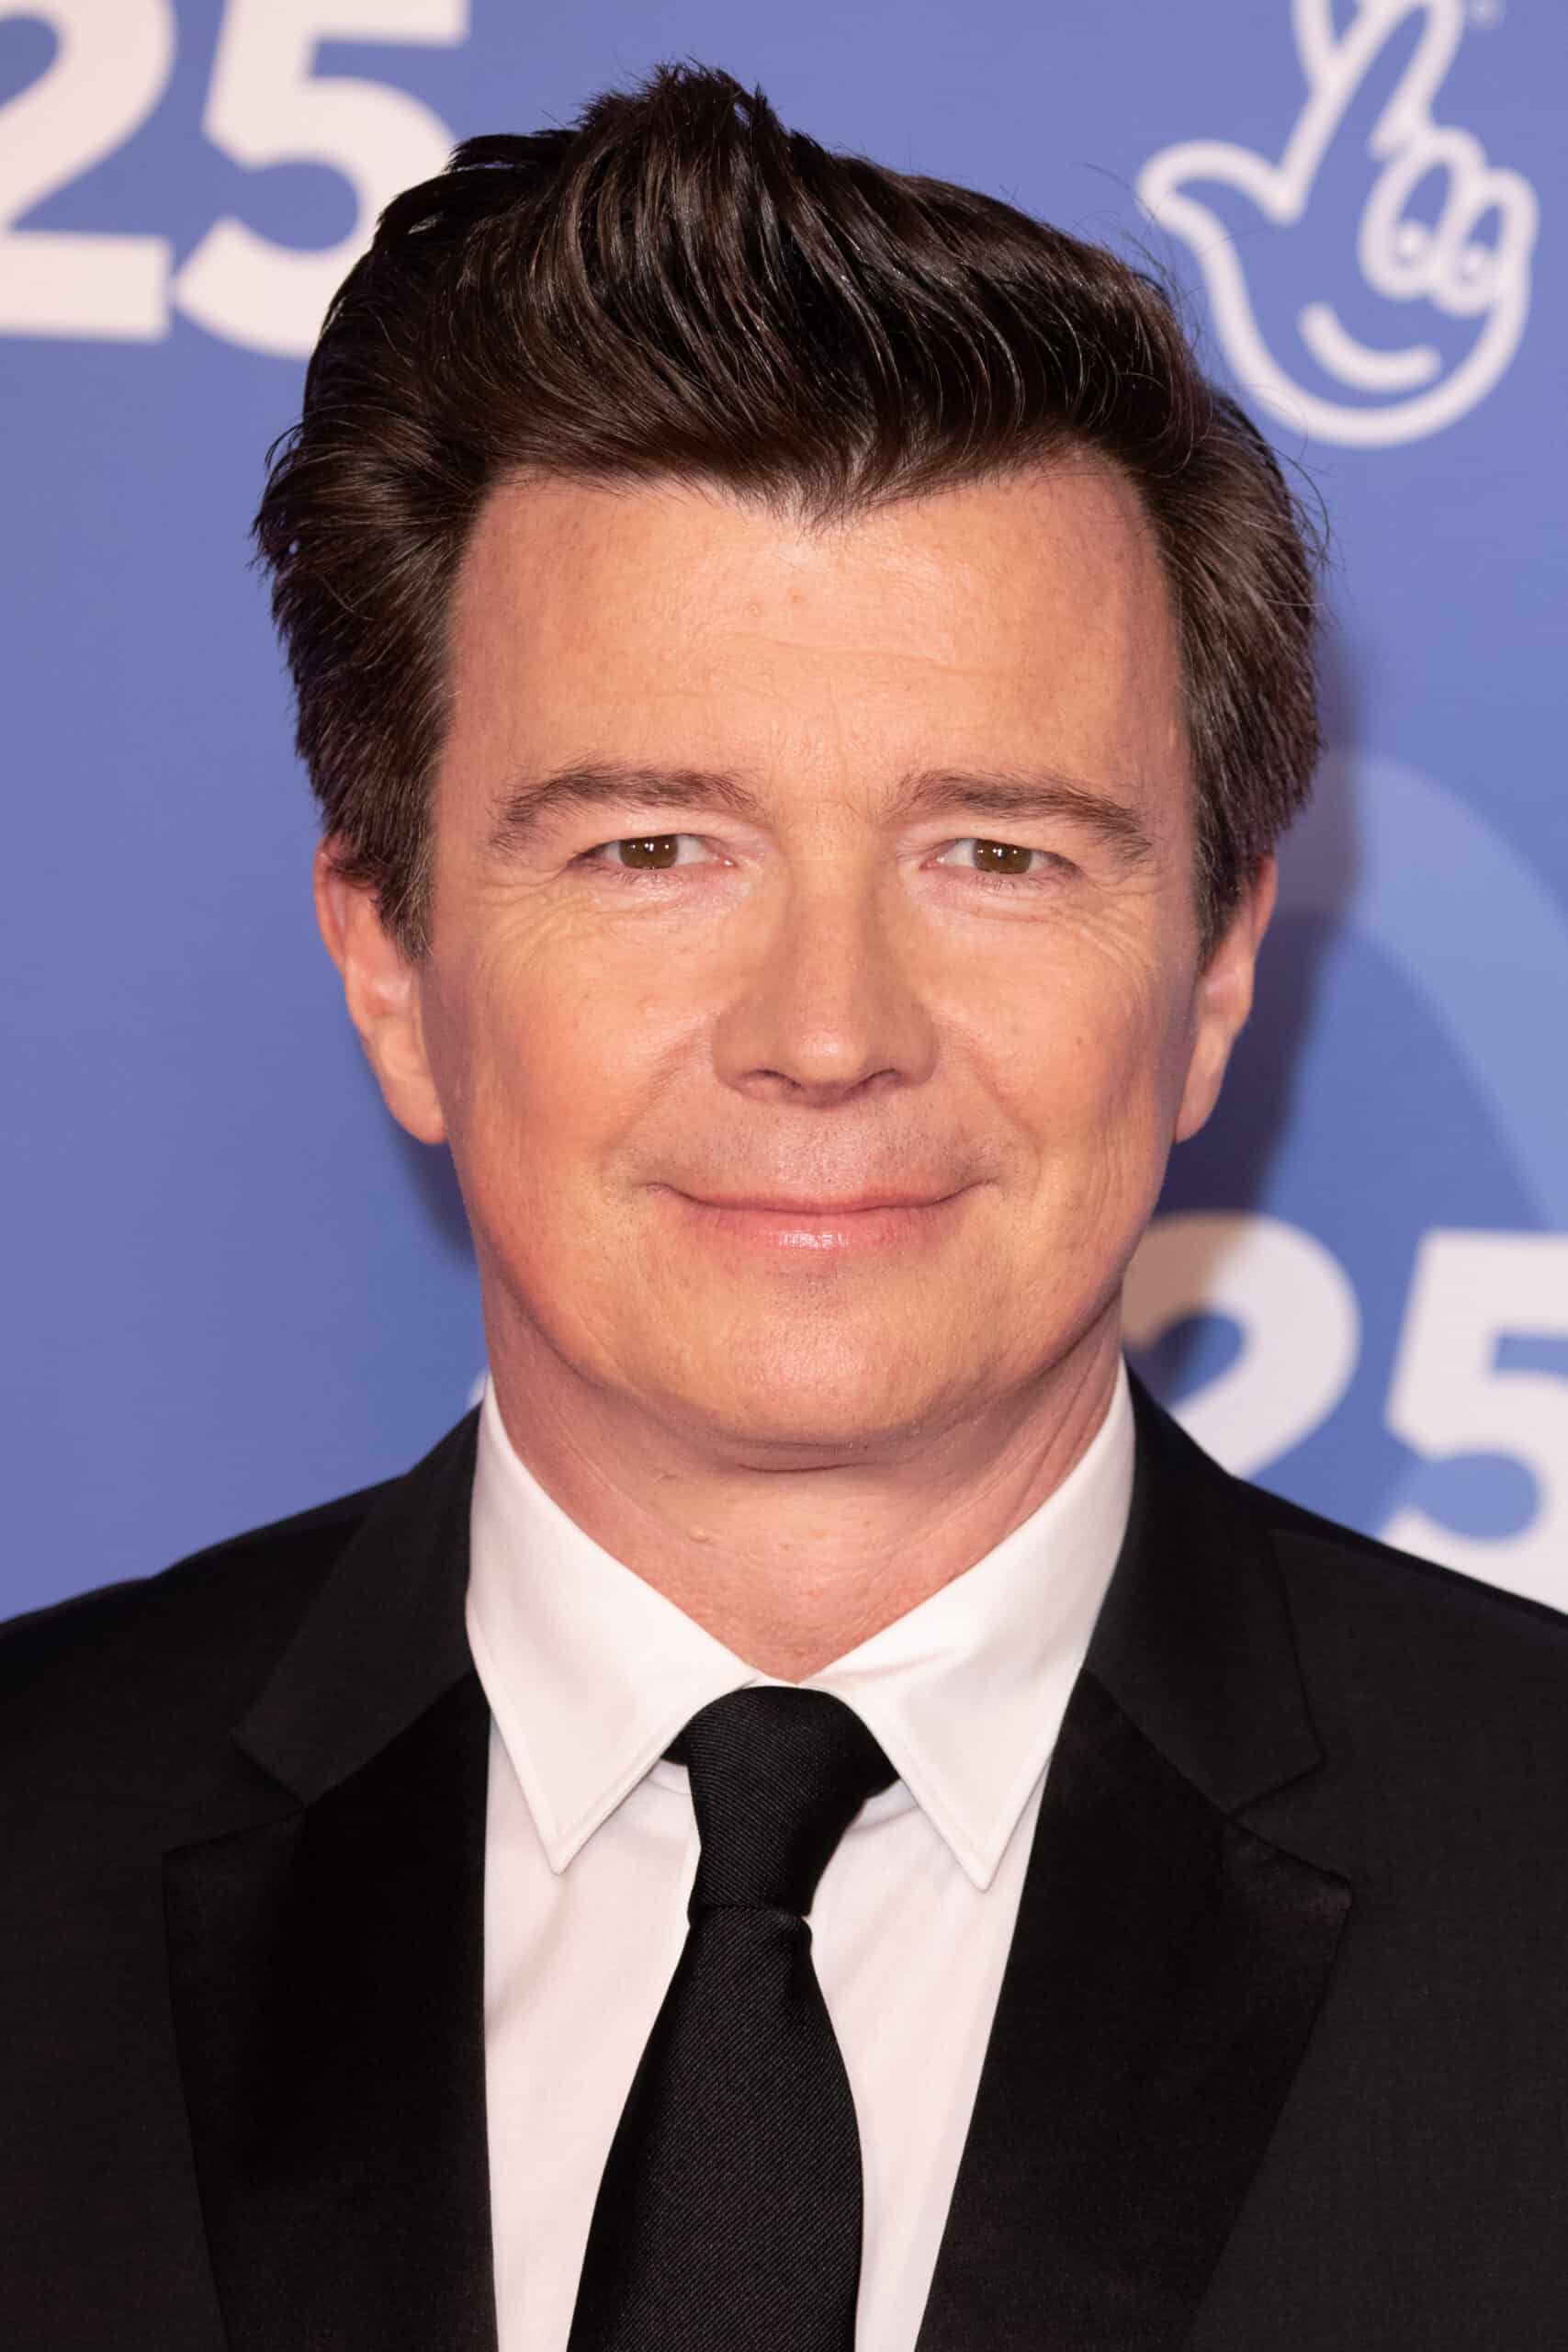 Who Is Rick Astley's 'Never Gonna Give You Up' About?